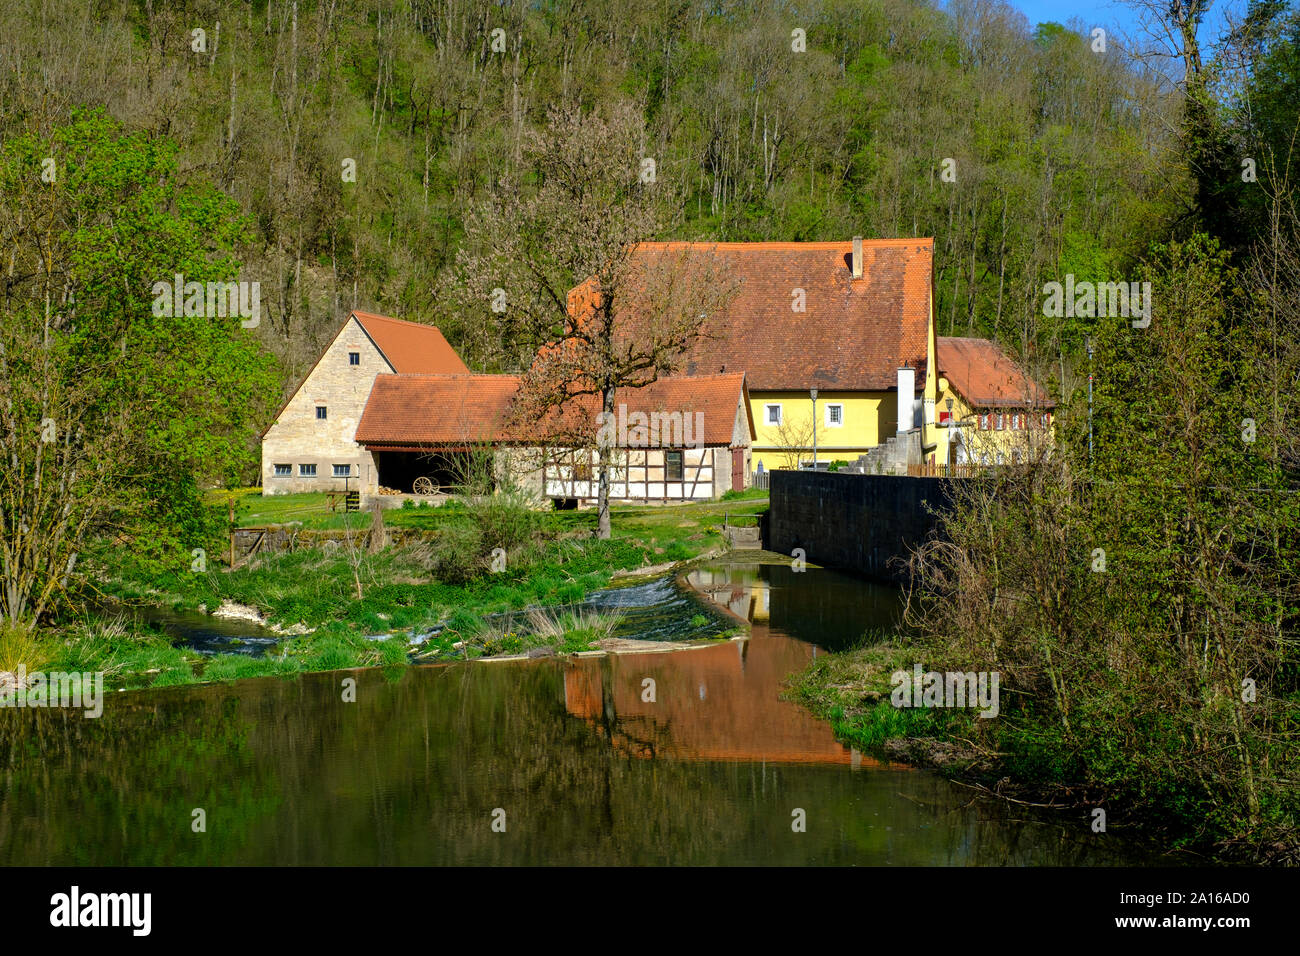 Tauber river and secluded houses in Tauber Valley, Rothenburg ob der Tauber, Bavaria, Germany Stock Photo